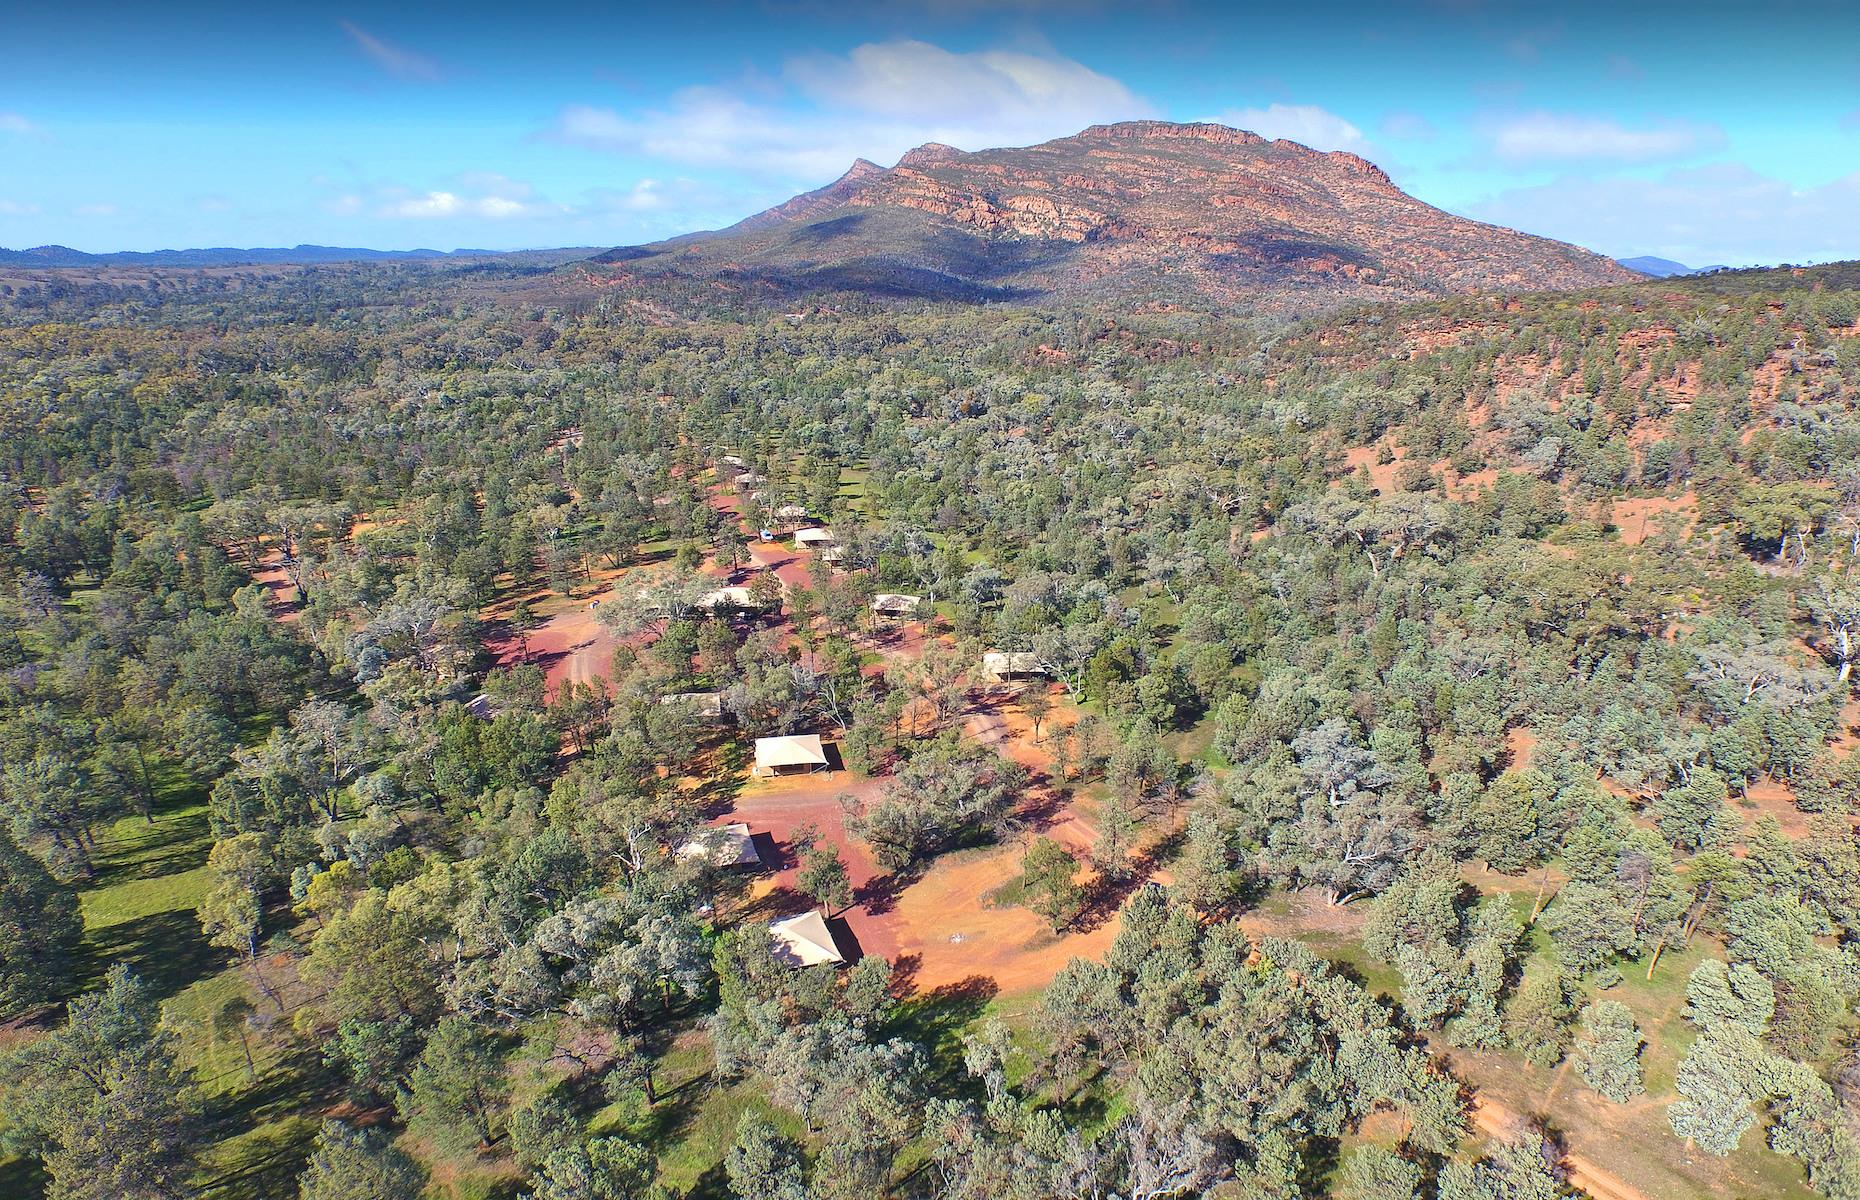 <p>When it comes to location, it’s hard to beat the setting of <a href="https://www.wilpenapound.com.au/accommodation/ikara-safari-camp/">Ikara Safari Camp</a>. With the majestic natural amphitheater of Wilpena Pound looming right above, the occupants of the 15 tents of Wilpena Pound Resort's glam outback outpost have sensational views. The fan-cooled tents mostly sleep two with a couple of family-sized ones sleeping four. The emphasis at the camp, which is part-owned by Indigenous Business Australia and traditional land owners, the Adnyamathanha, is on eco-conscious exploration and utter immersion in the ancient landscape. </p>